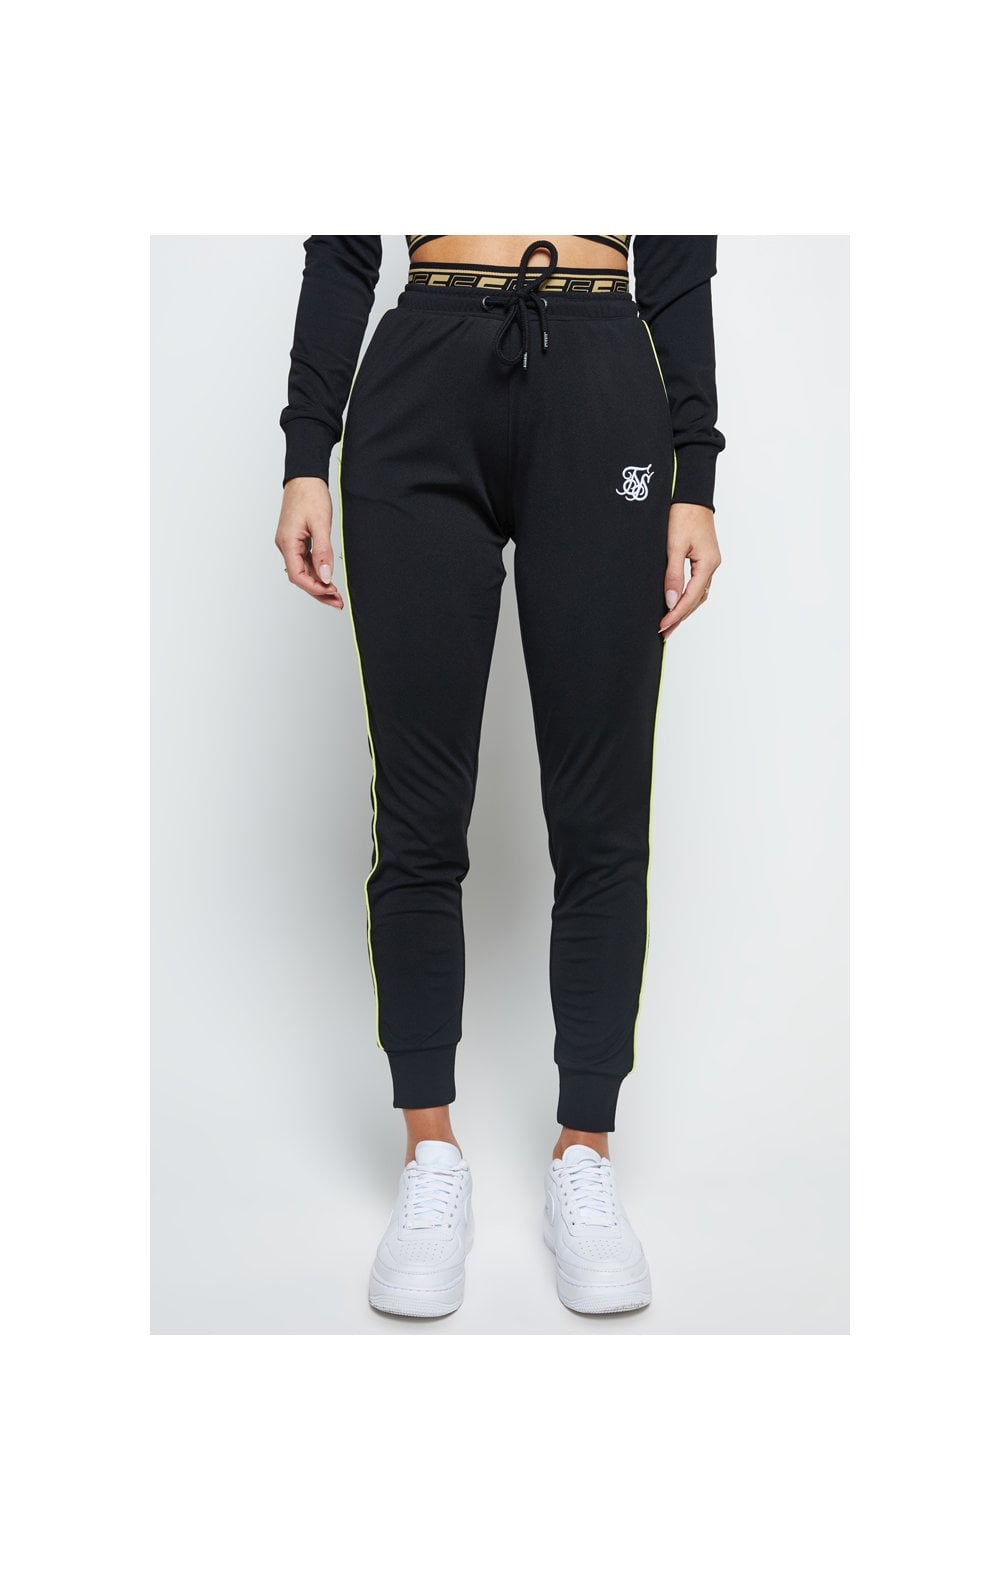 Load image into Gallery viewer, SikSilk Roma Tape Track Pants – Black (2)